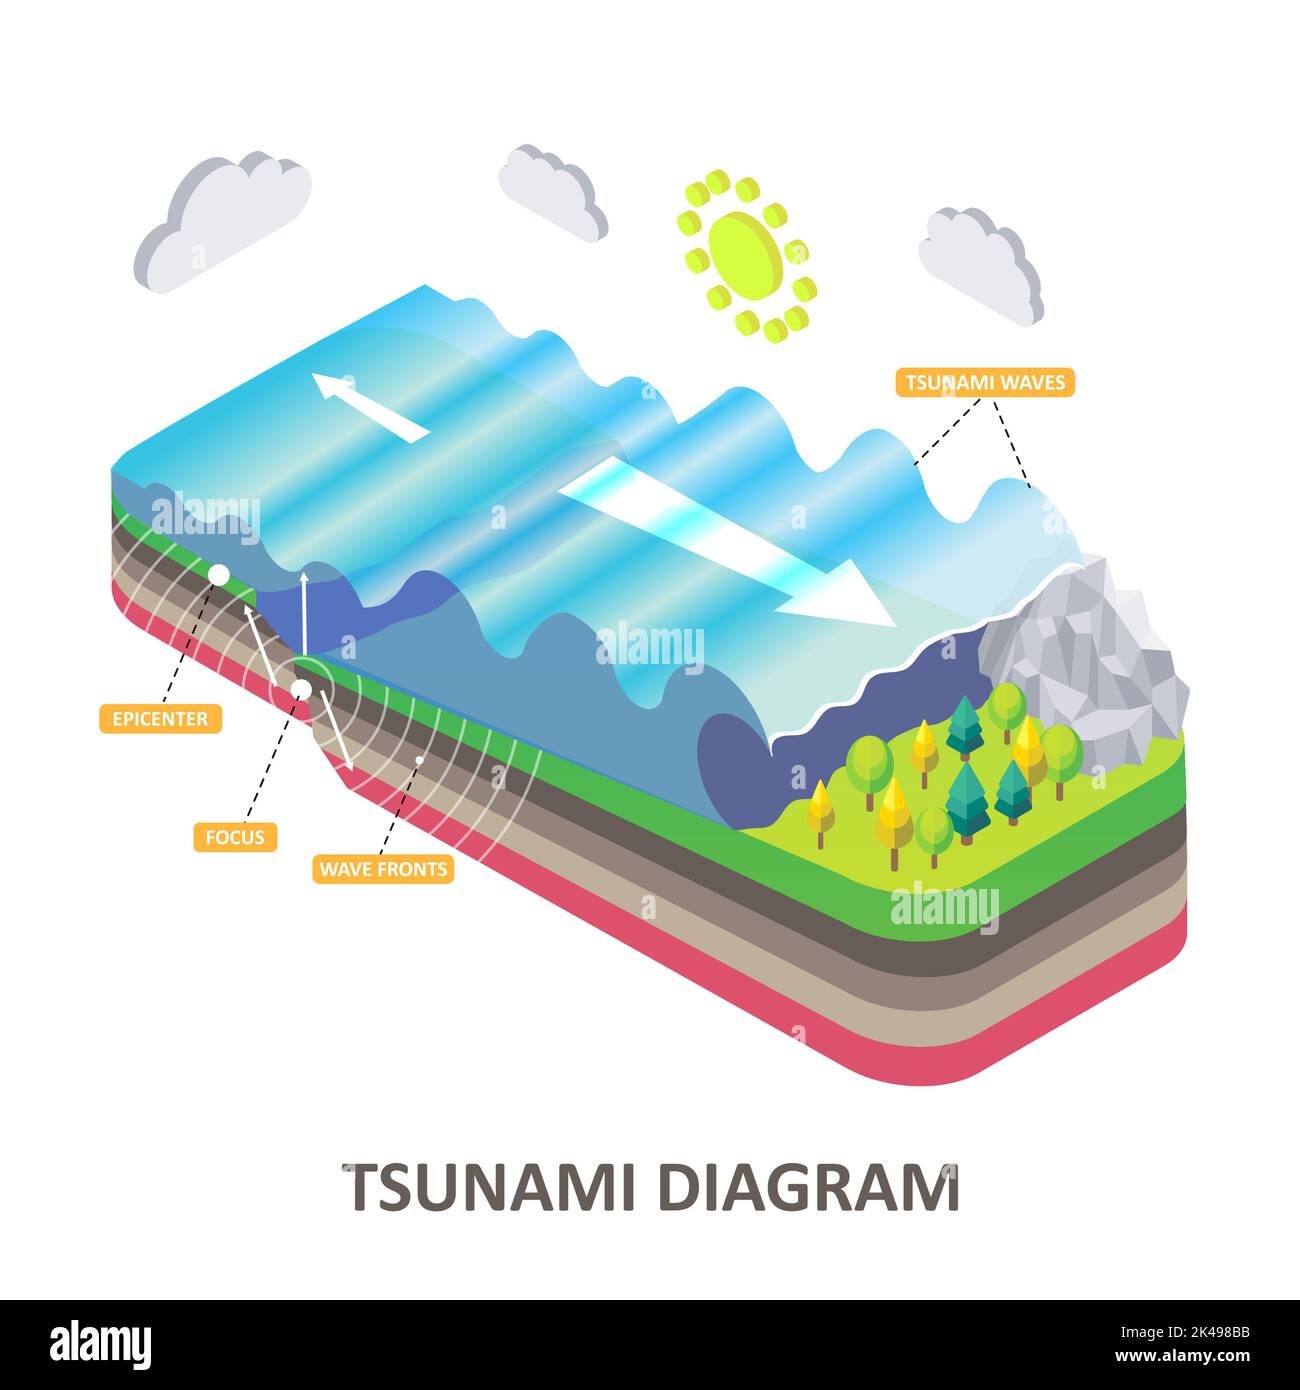 Tsunami diagram. Vector isometric seismic sea wave with epicenter, focus and wavefronts. Natural disasters concept for educational poster, scientific Stock Vector